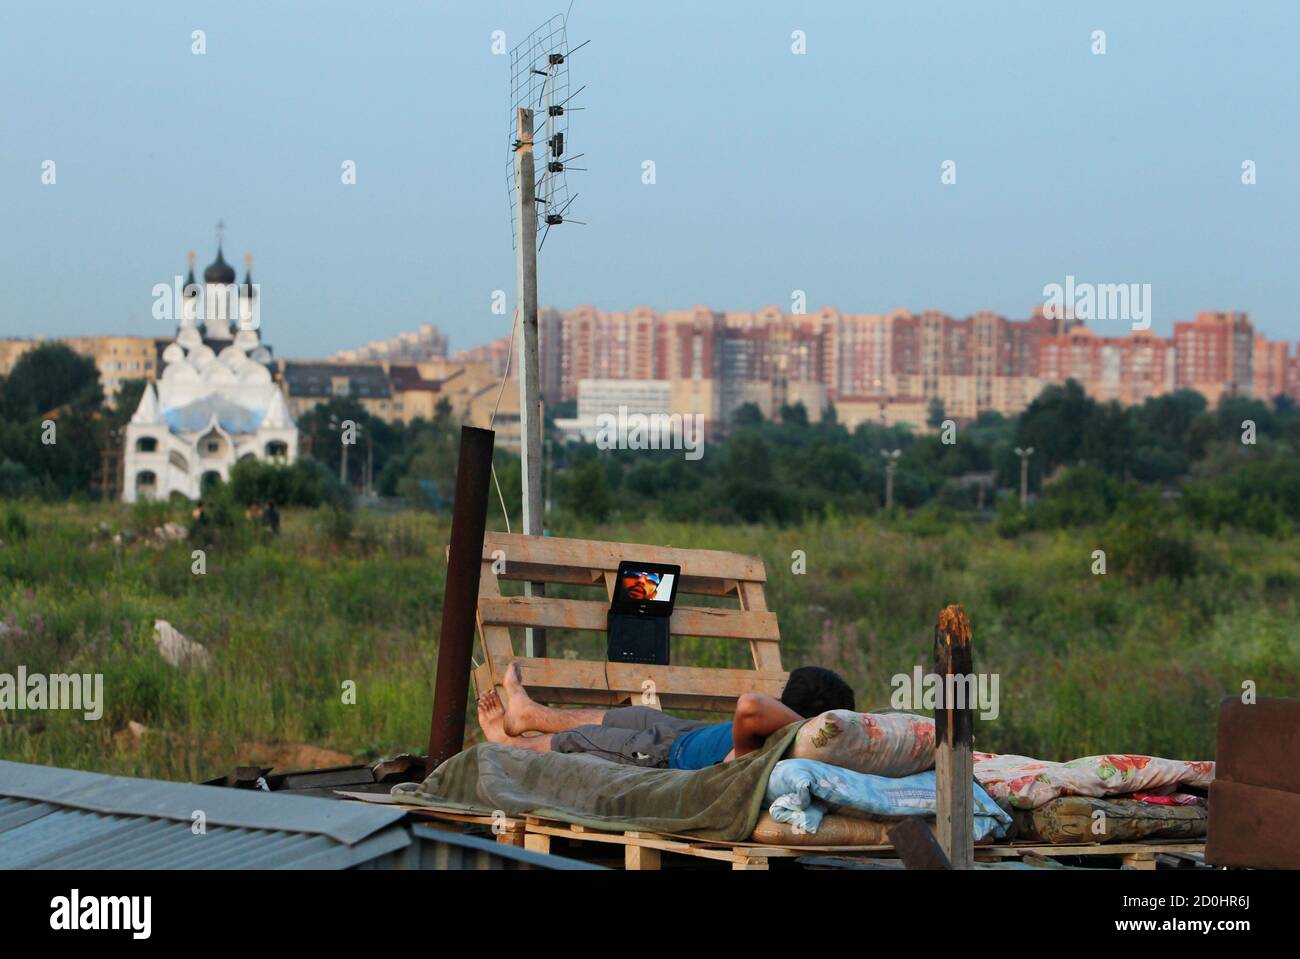 ATTENTION EDITORS - IMAGE 32 OF 34 FOR PICTURE PACKAGE 'MOSCOW'S MIGRANT  WORK FORCE' A migrant worker watches a film on his laptop on top of a  shelter outside Moscow, July 6